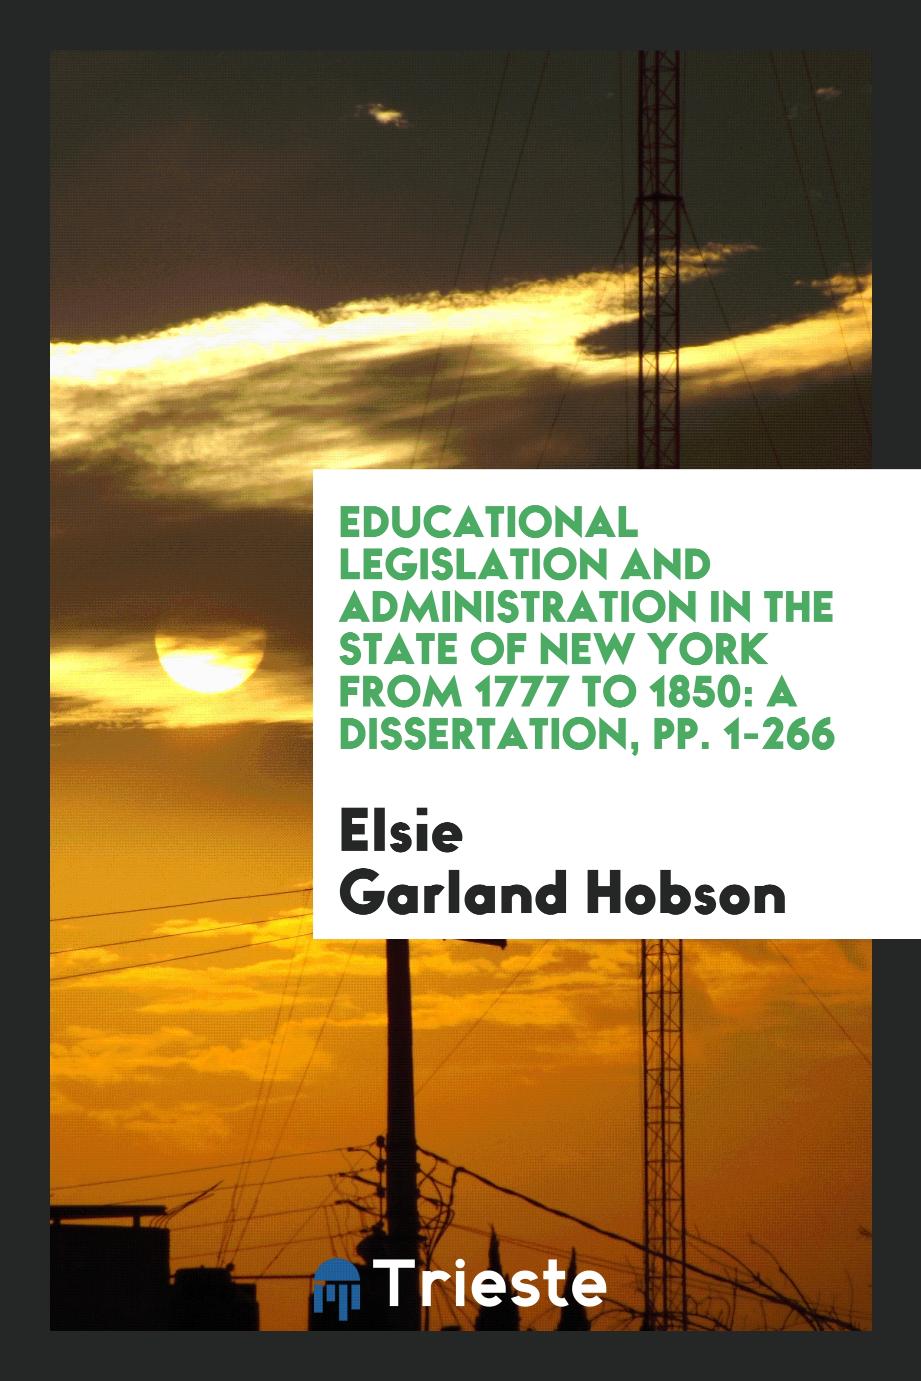 Educational Legislation and Administration in the State of New York from 1777 to 1850: A Dissertation, pp. 1-266